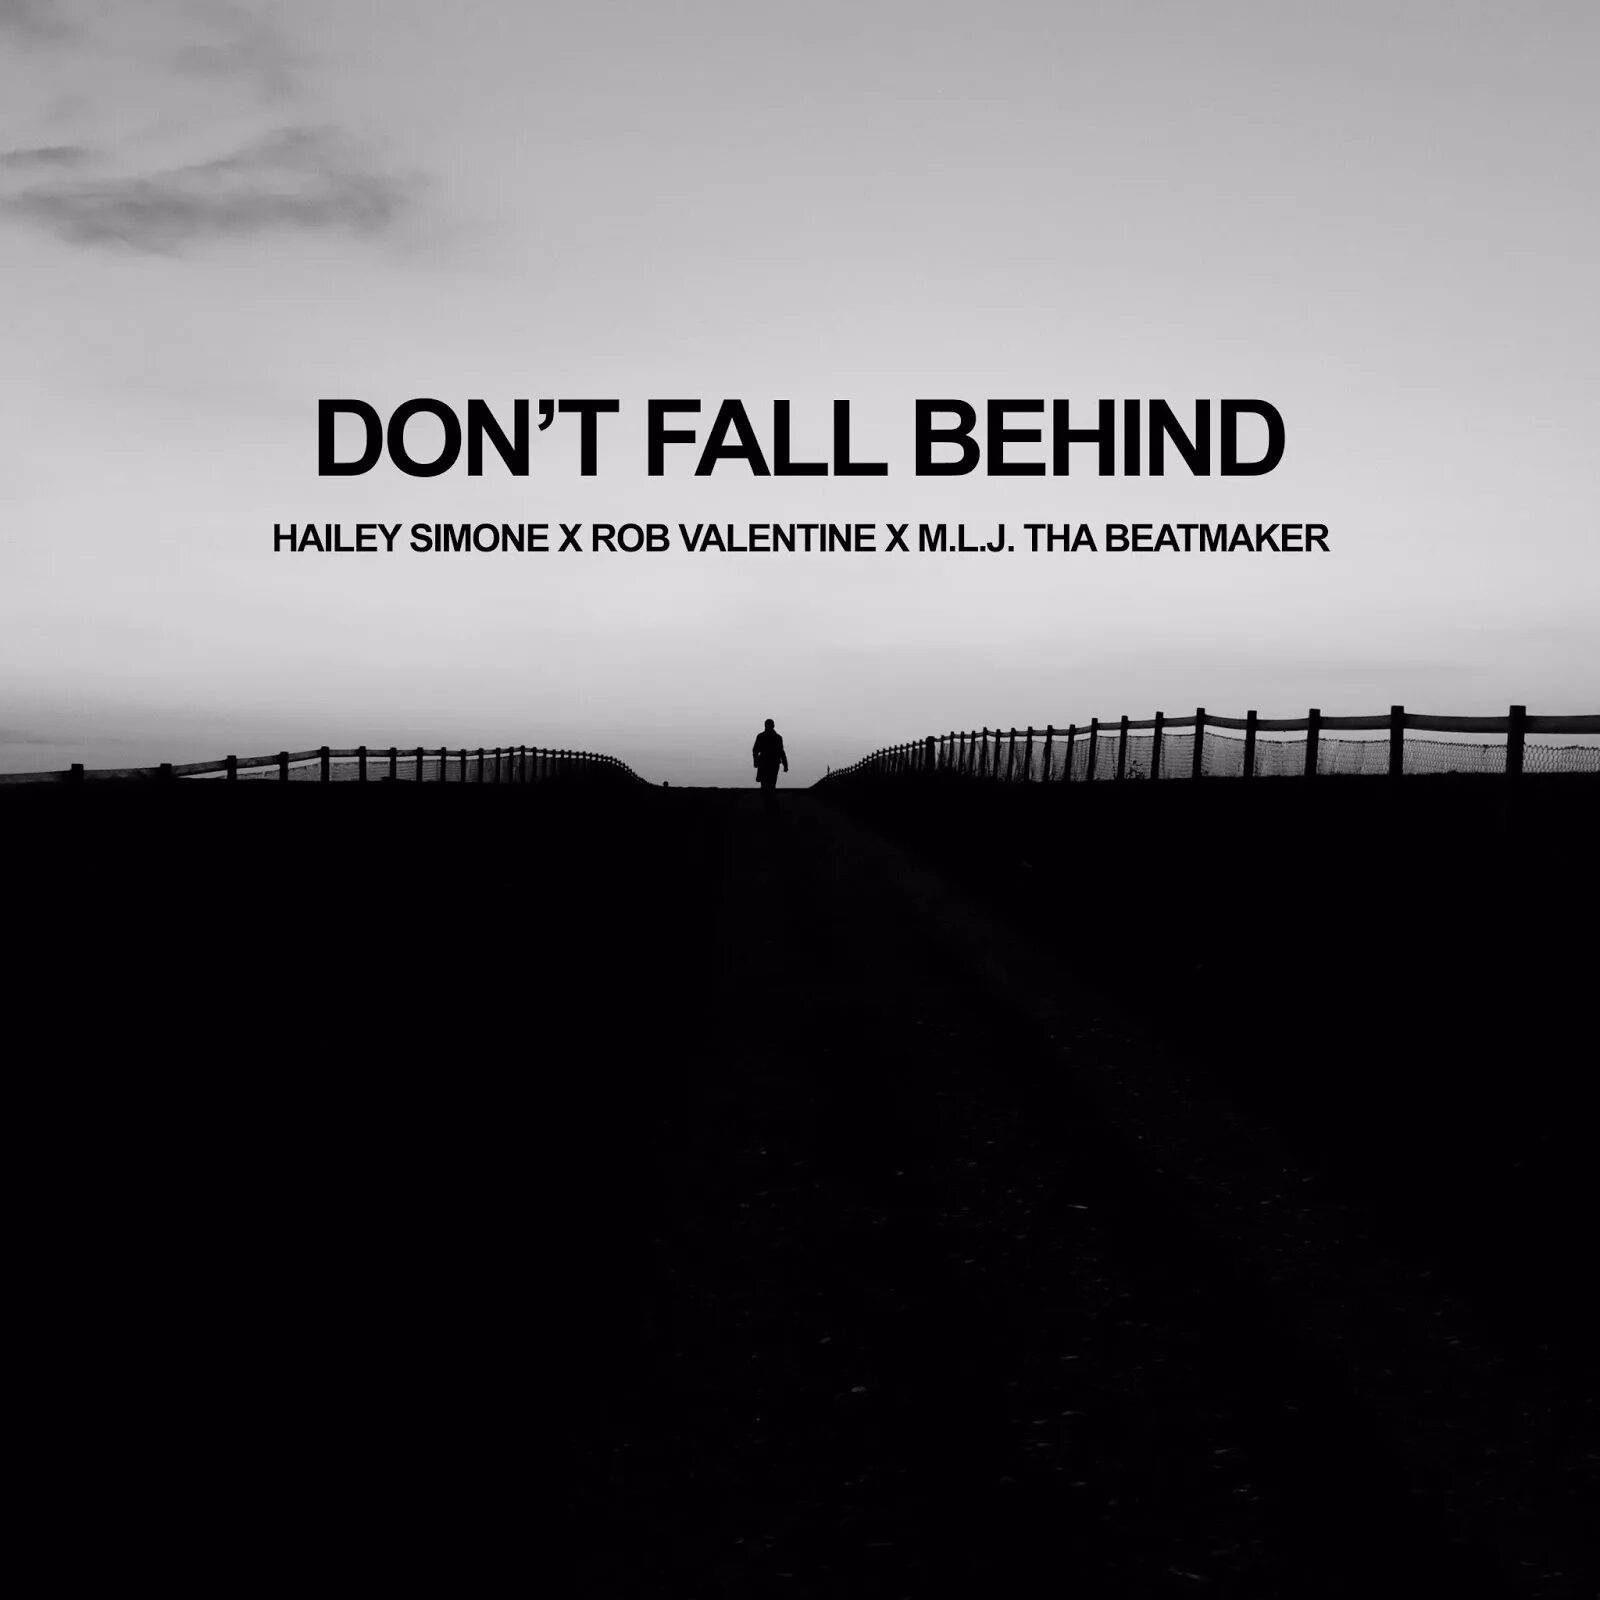 Fall behind. Don t Fall. Falling behind. Don't Fall behind the times background. Dont fall